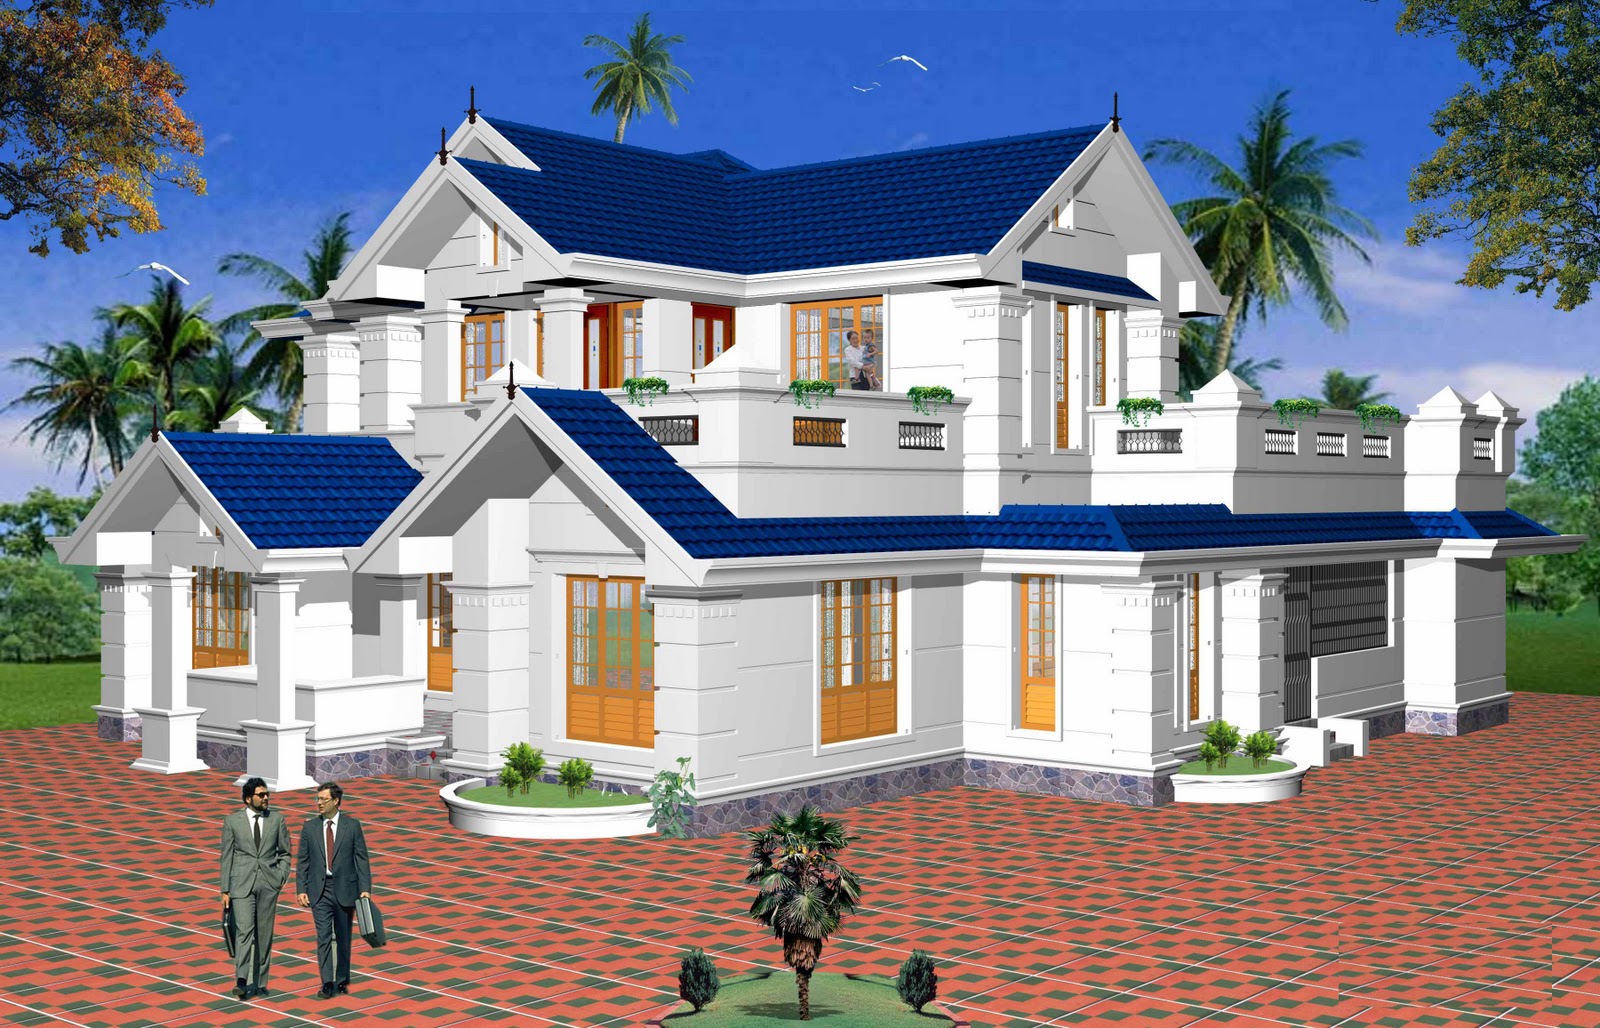 ... , House Plans, House Design, Front Elevation, Costomized House Plan